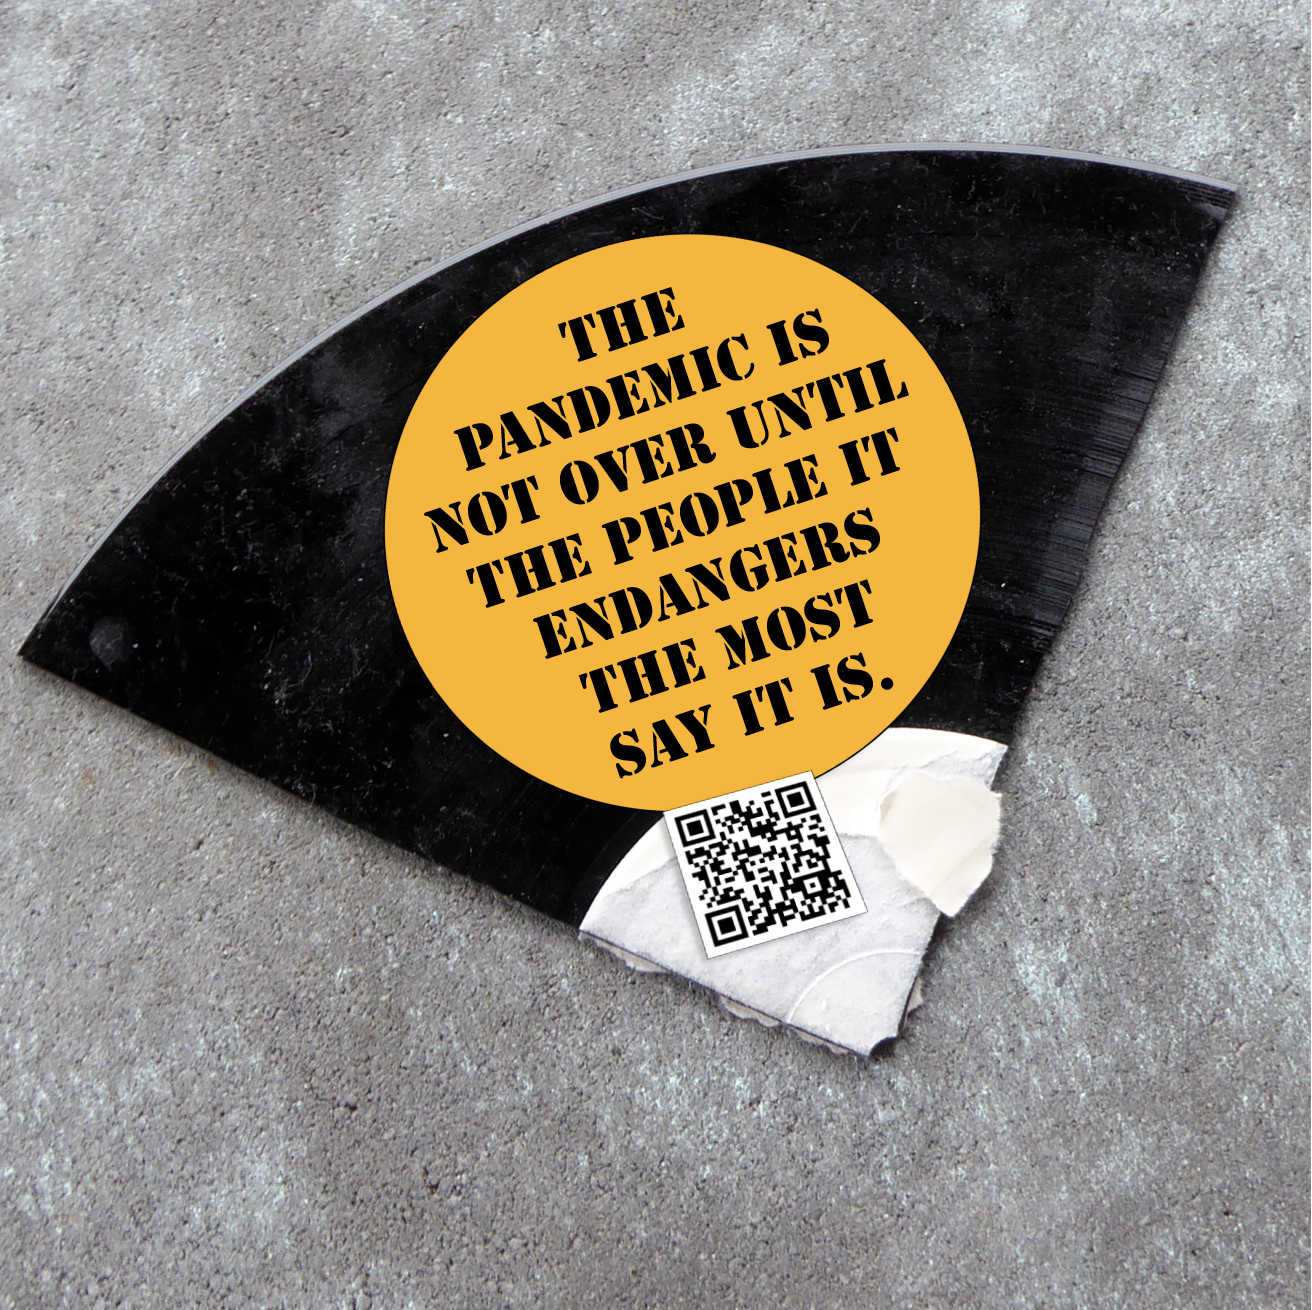 A shard of a record with a sticker on it that reads "The pandemic is not over until the people it endangers the most say it is. Next to it there's a QR-code that leads to our zine: An Open Letter to our Comrades